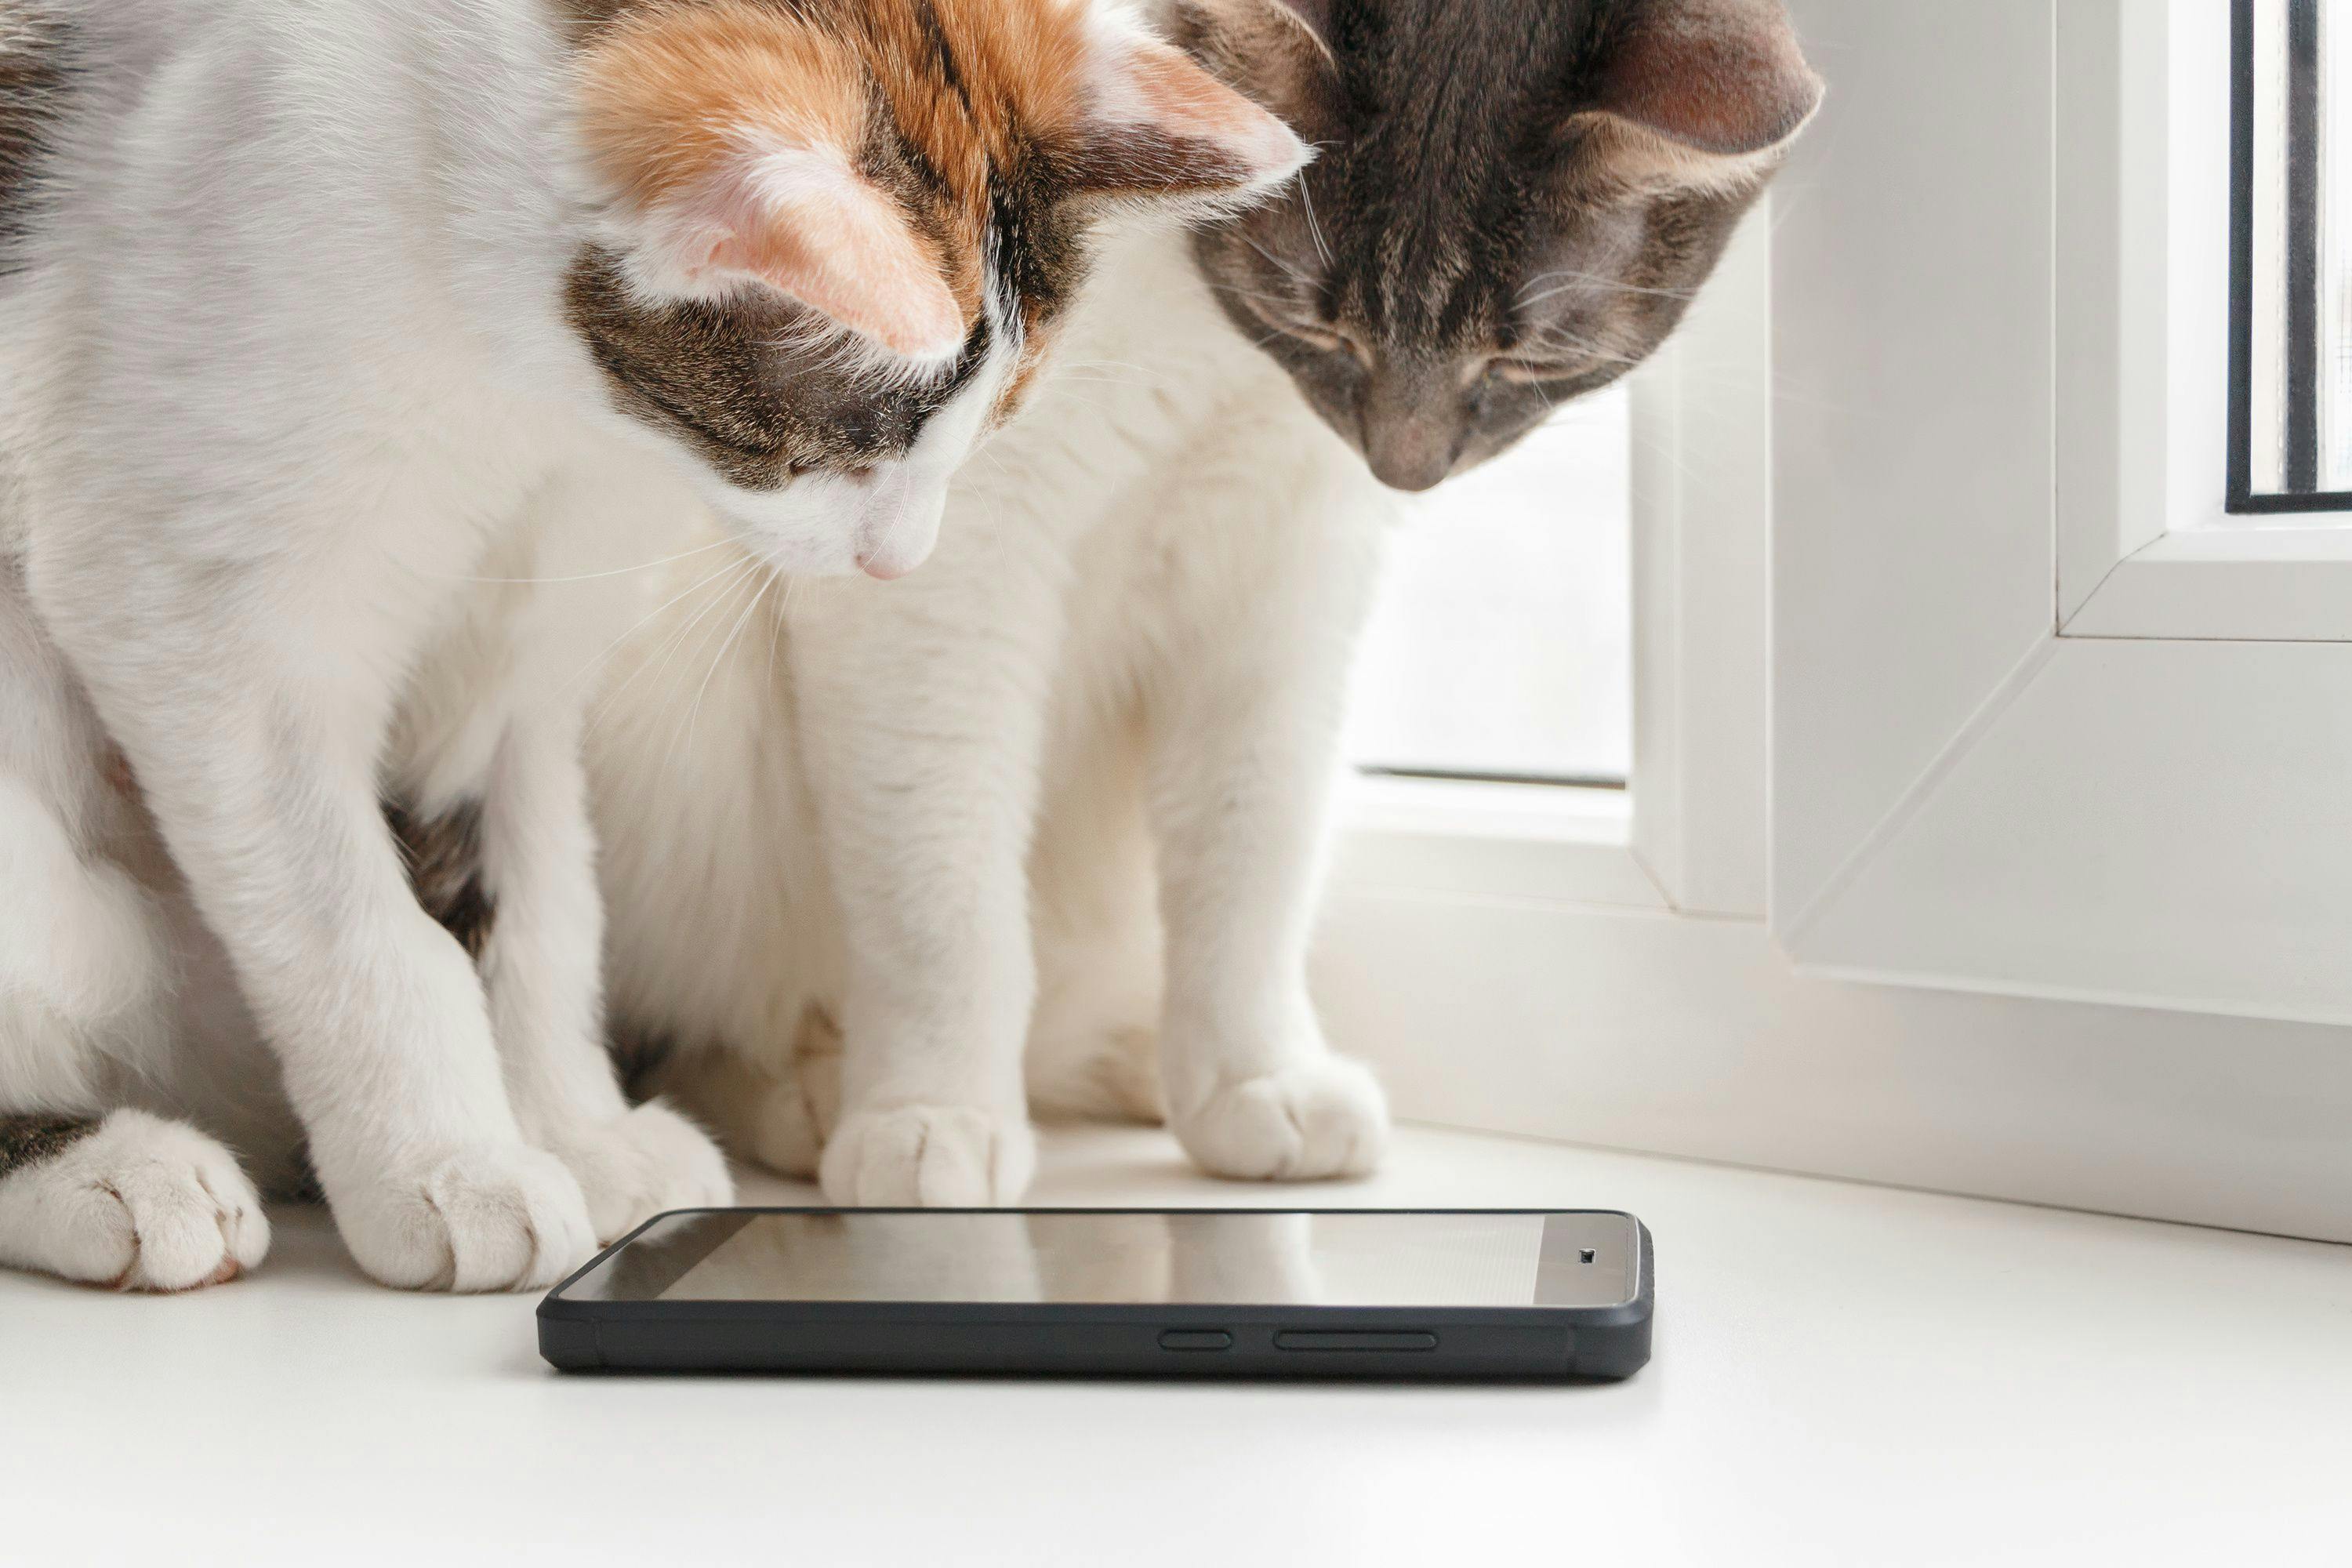 Two cats looking at a phone screen